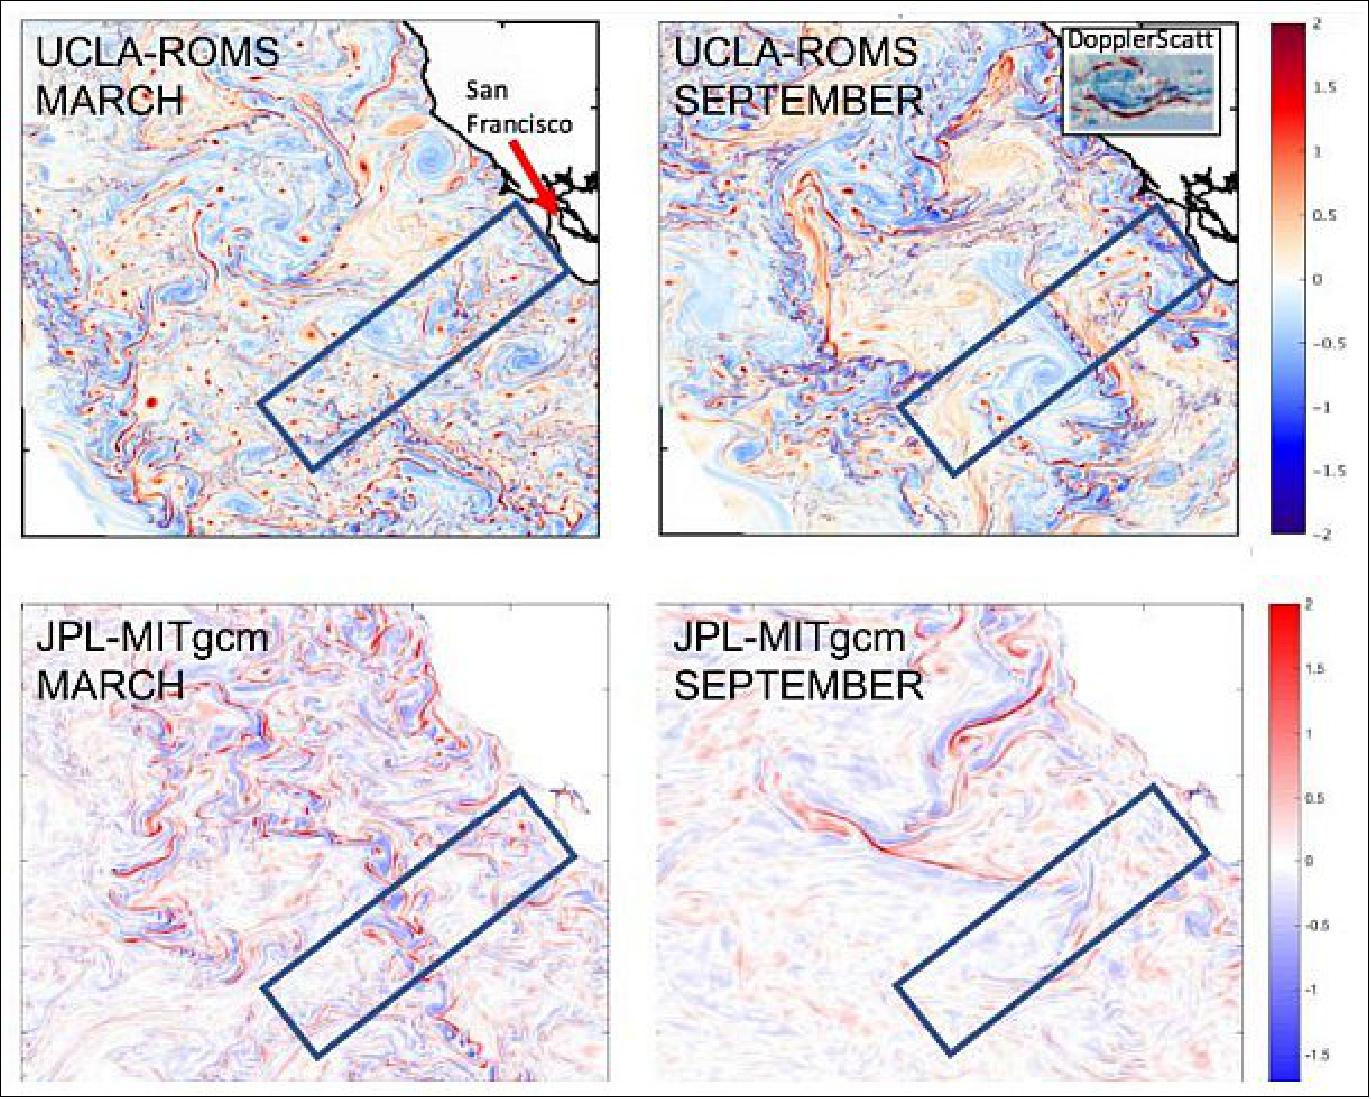 Figure 1: Surface vorticity off Central California in two submesoscale-resolving models in March (left column) and September (right column). Regional ROMS (top row 500 m resolution) and JPL-MITgcm (bottom row, ~ 2km resolution) show different seasonal cycles. The rectangle in the upper left shows our experiment domain. The vorticity has been normalized by the local value of the Coriolis parameter. The inset in the upper-right panel is the normalized vorticity measured by DopplerScatt in the Gulf of Mexico, shown with the same distance scaling and color scale as in the model fields (image credit: NASA/JPL-Caltech)